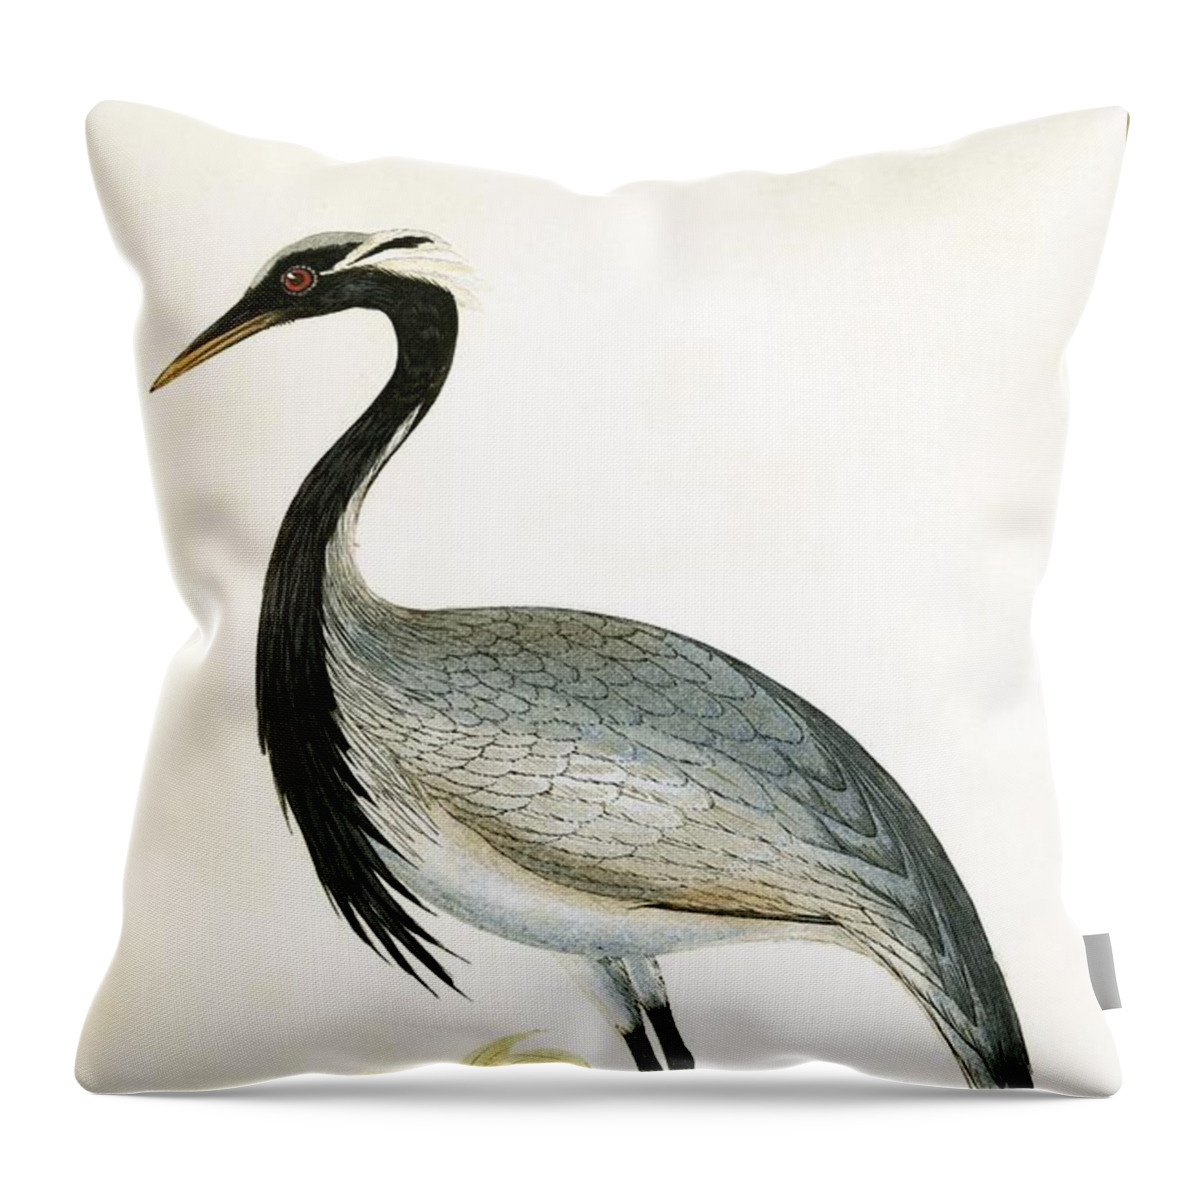 Bird Throw Pillow featuring the painting Numidian Crane by English School